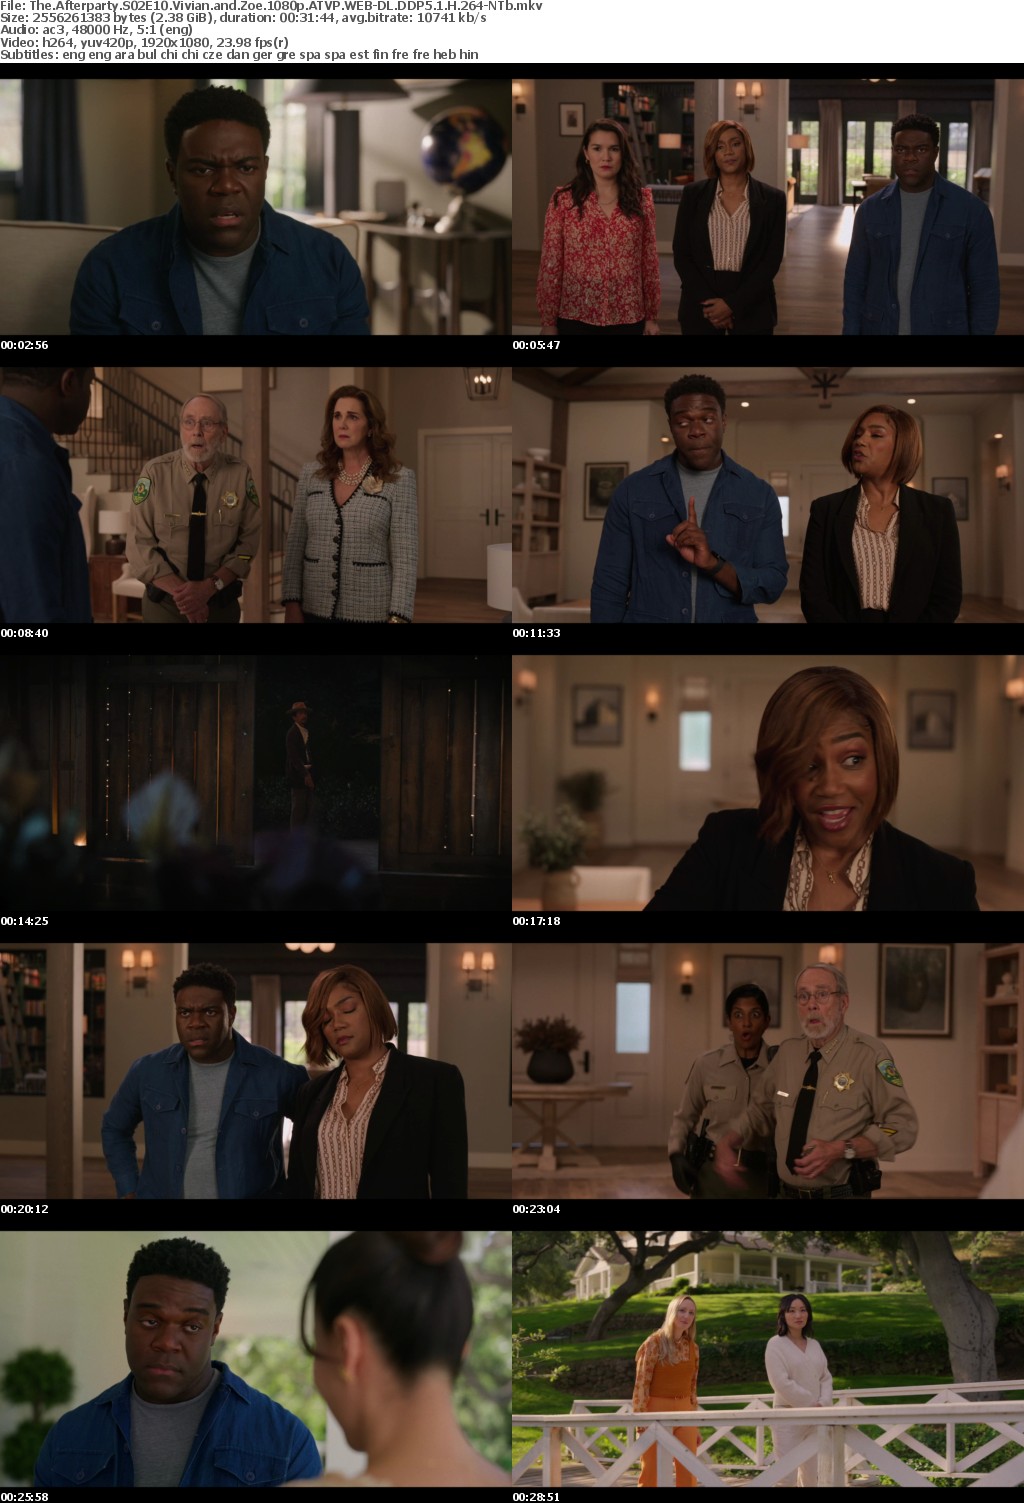 The Afterparty S02E10 Vivian and Zoe 1080p ATVP WEB-DL DDP5 1 H 264-NTb